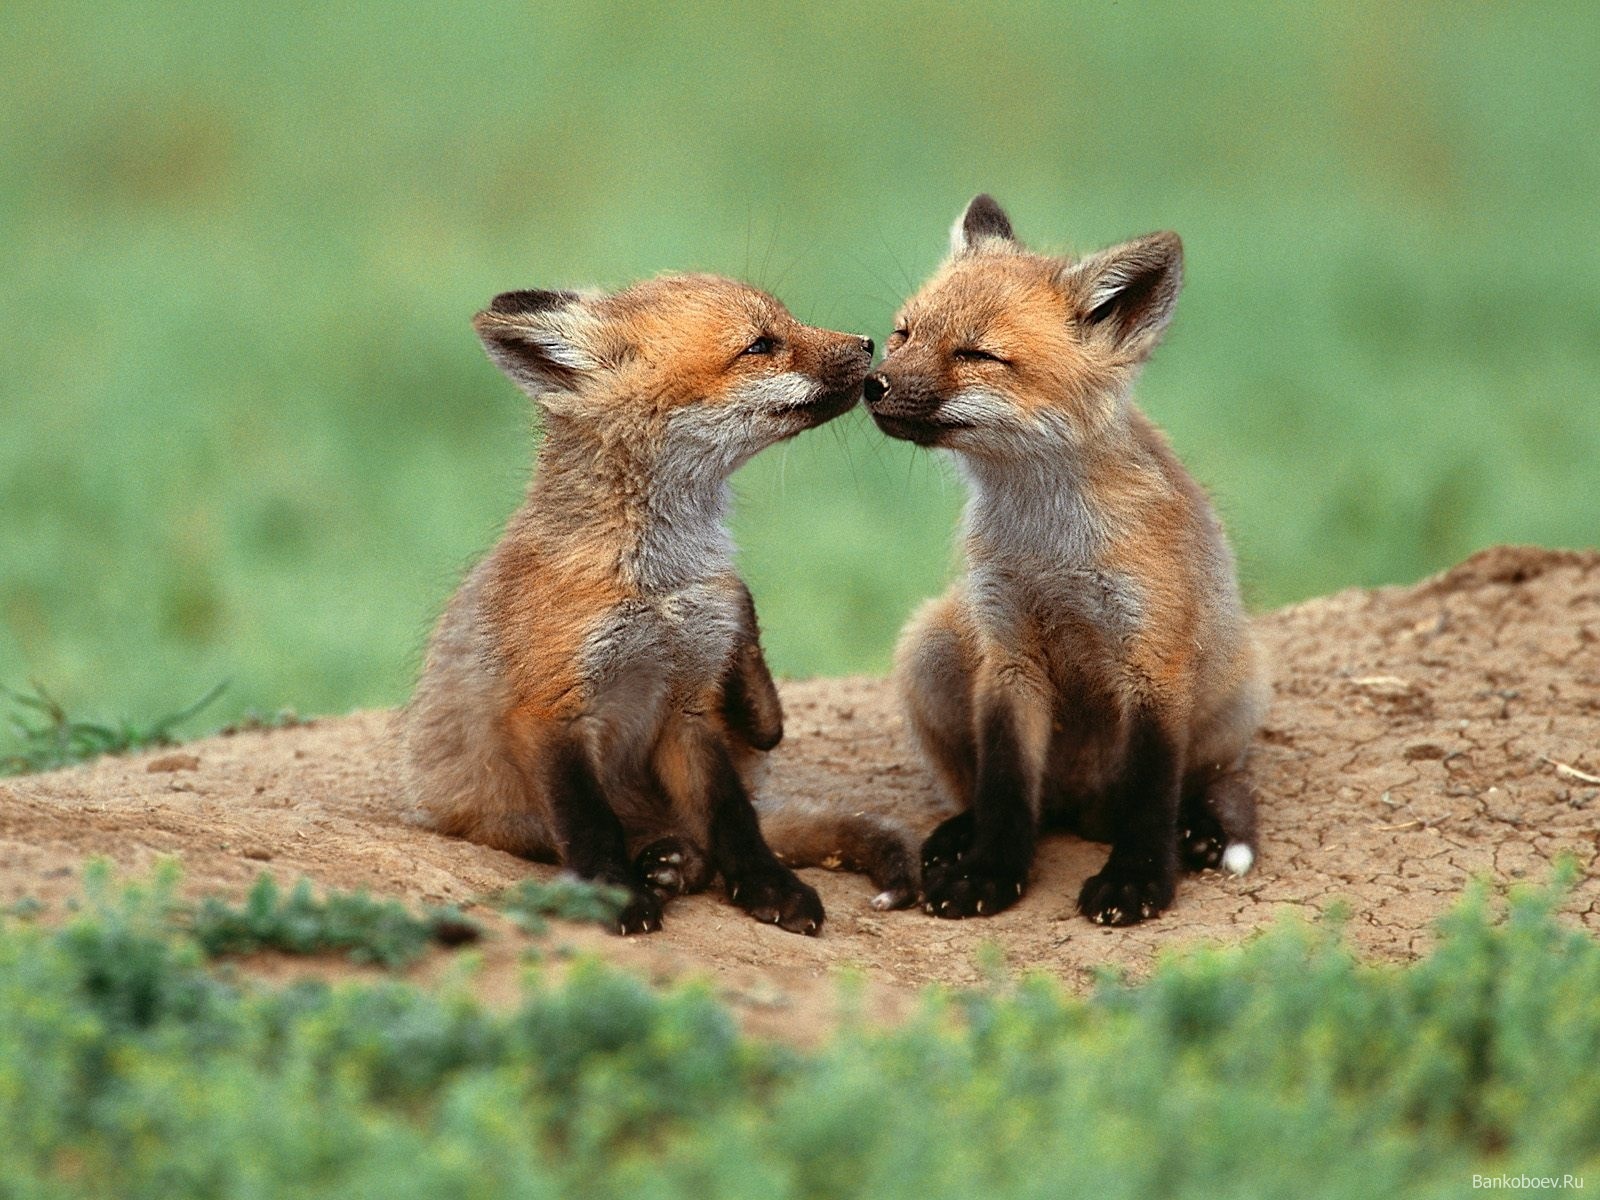 Cute Baby Fox Wallpaper Image Pictures Becuo